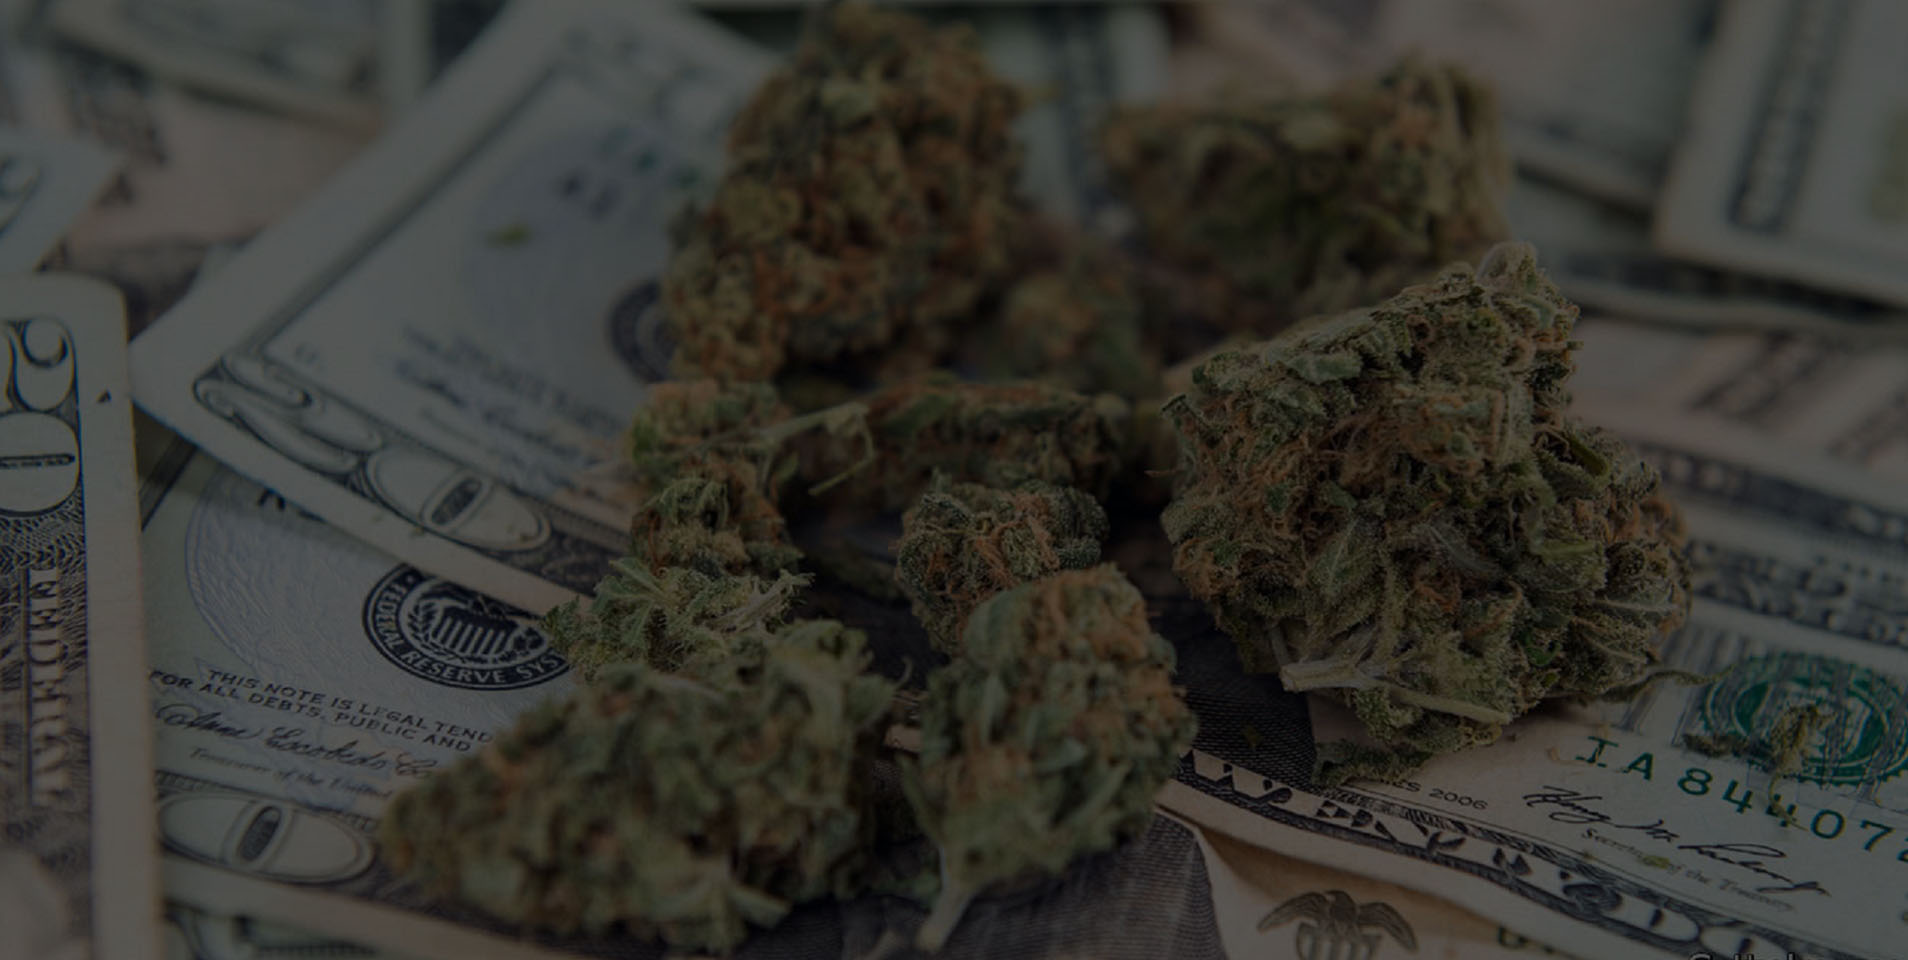 PROFITABILITY IN THE CANNABIS INDUSTRY